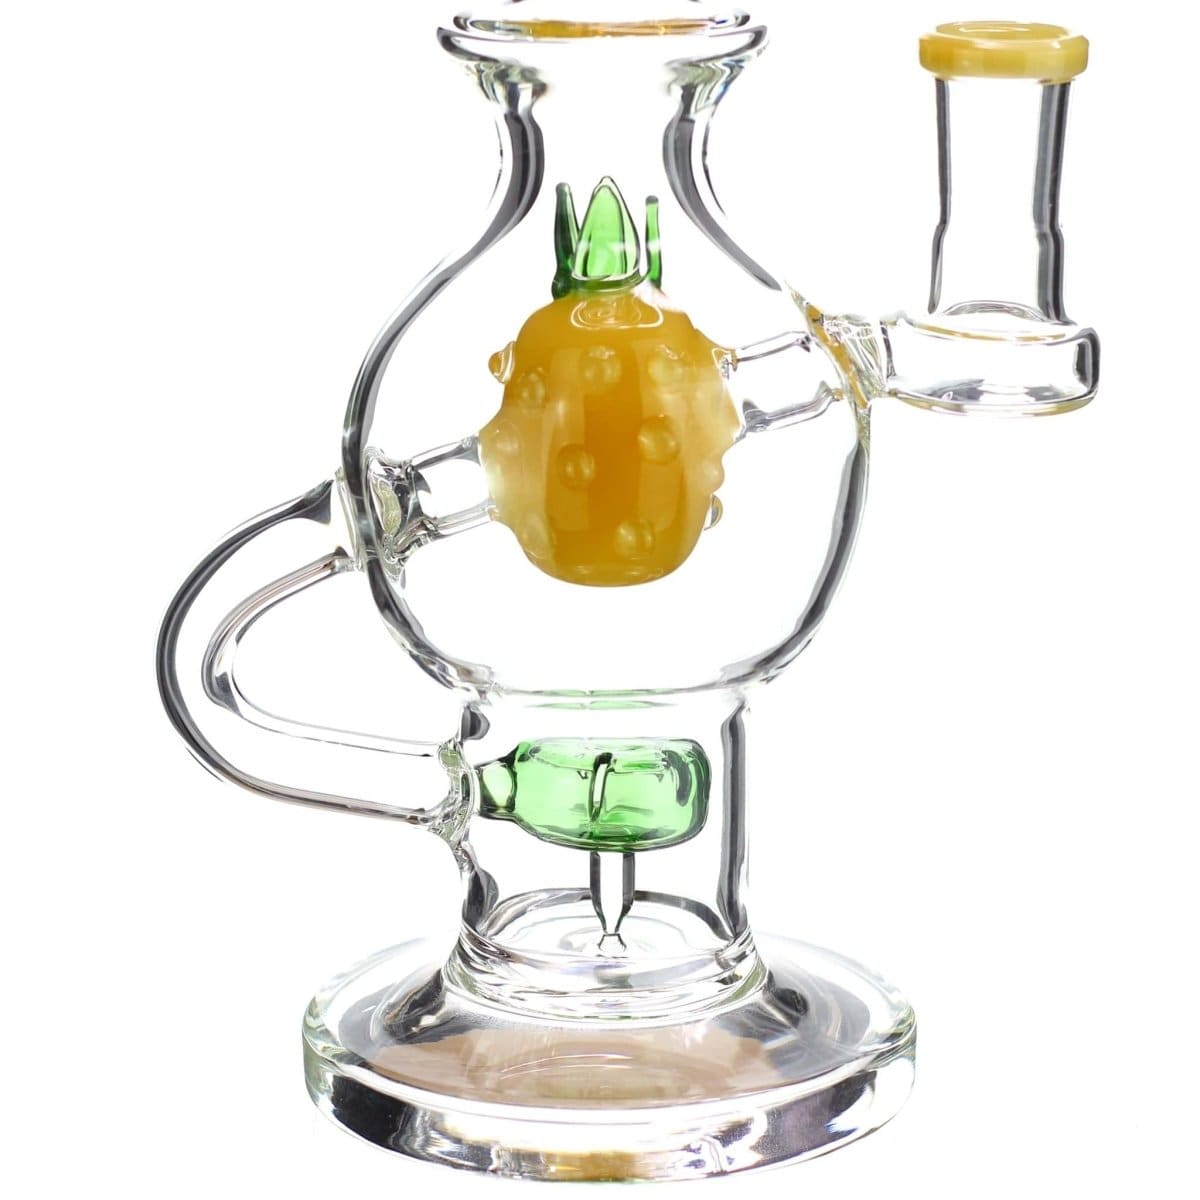 Benext Generation Glass Tropical Thunder Dome Bong